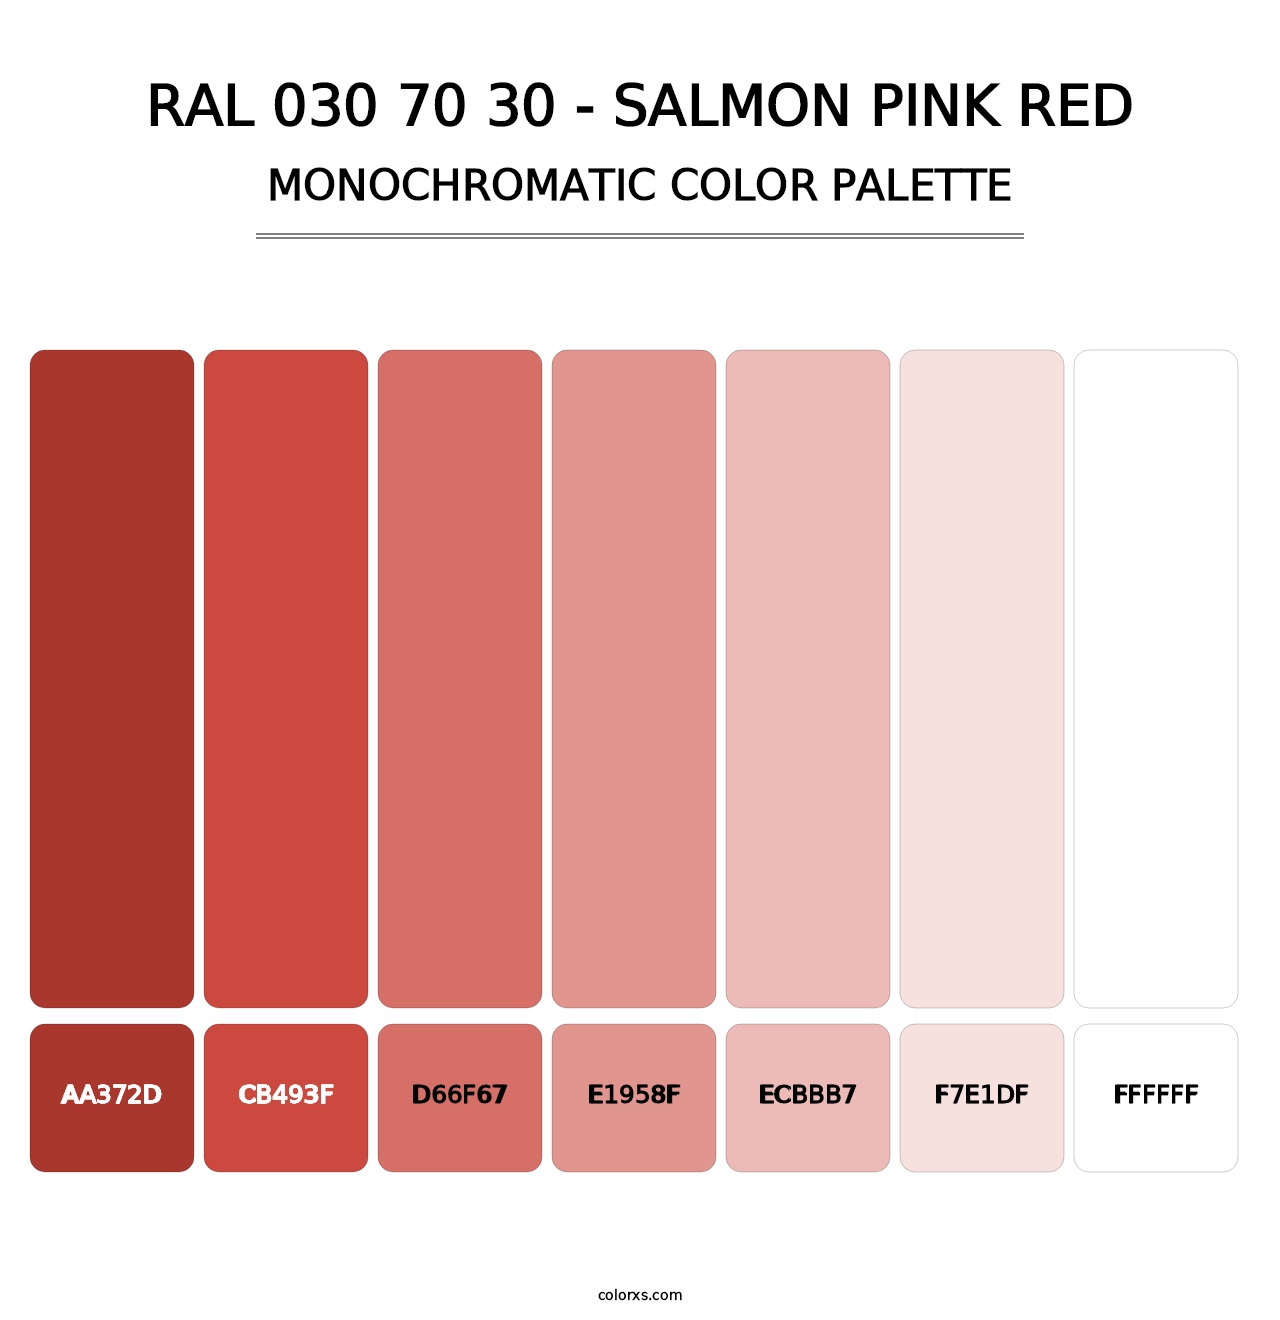 RAL 030 70 30 - Salmon Pink Red - Monochromatic Color Palette